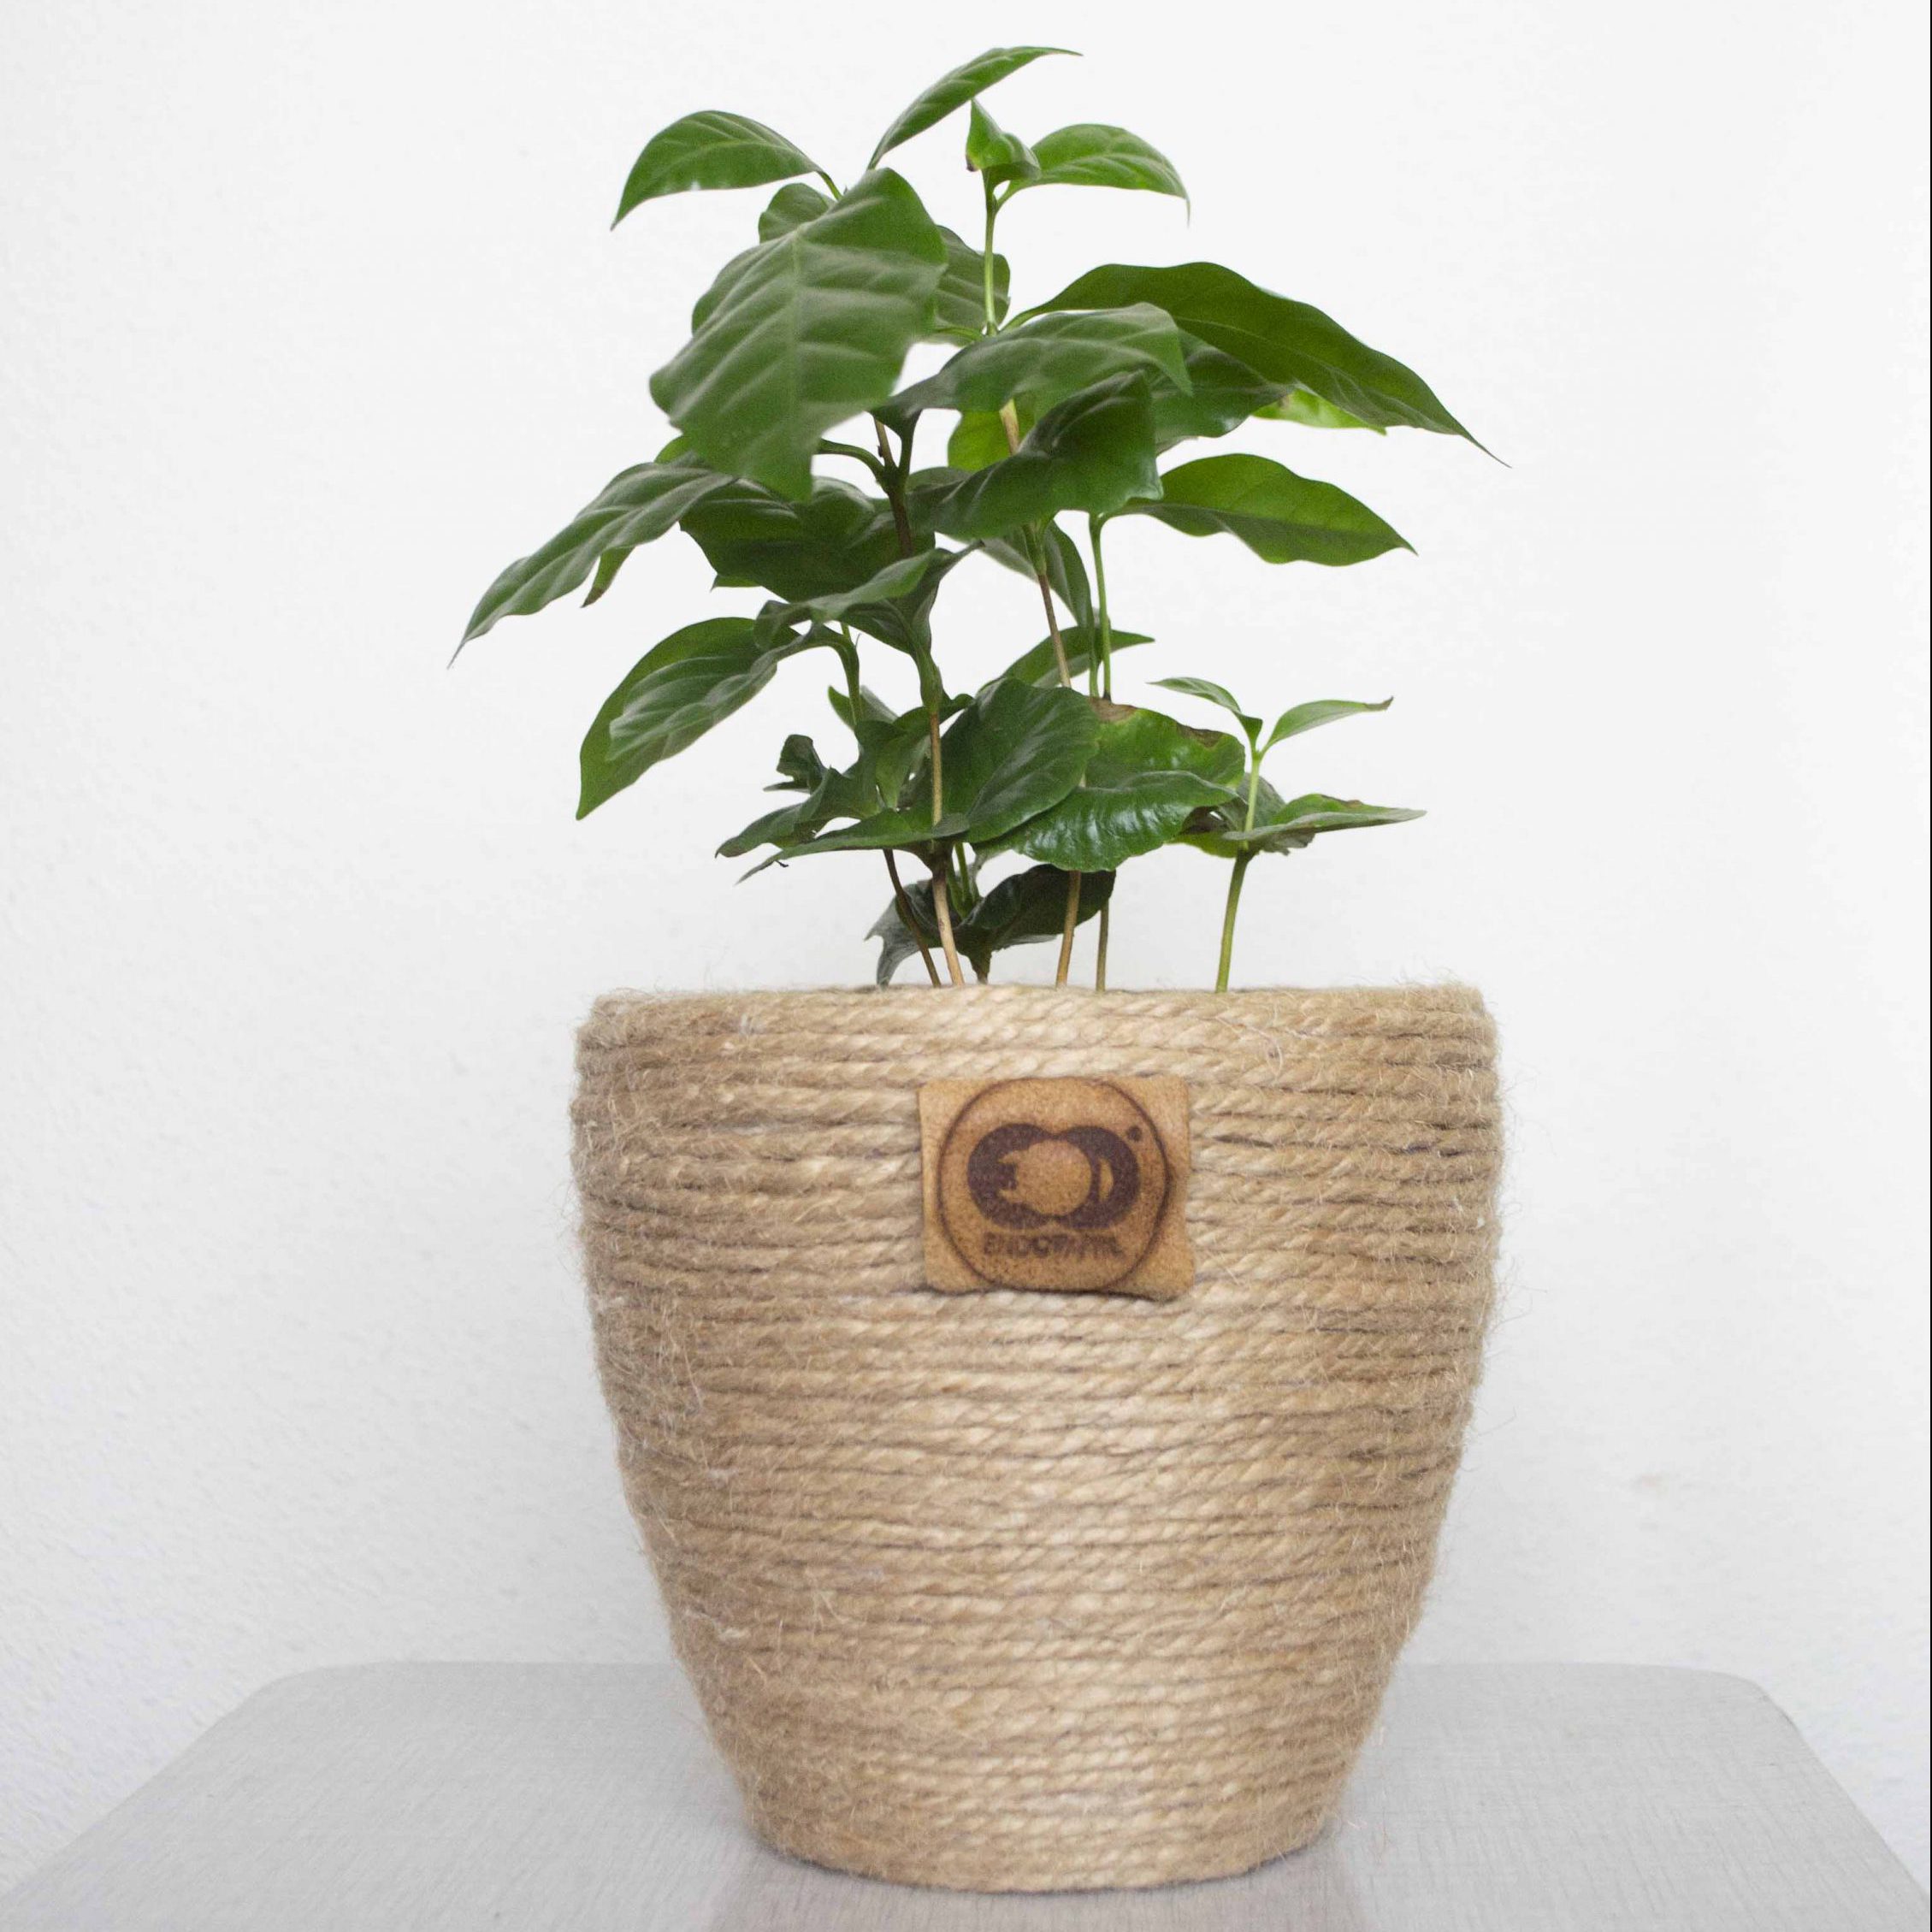 jute upcycled - End of - Bloempot jute